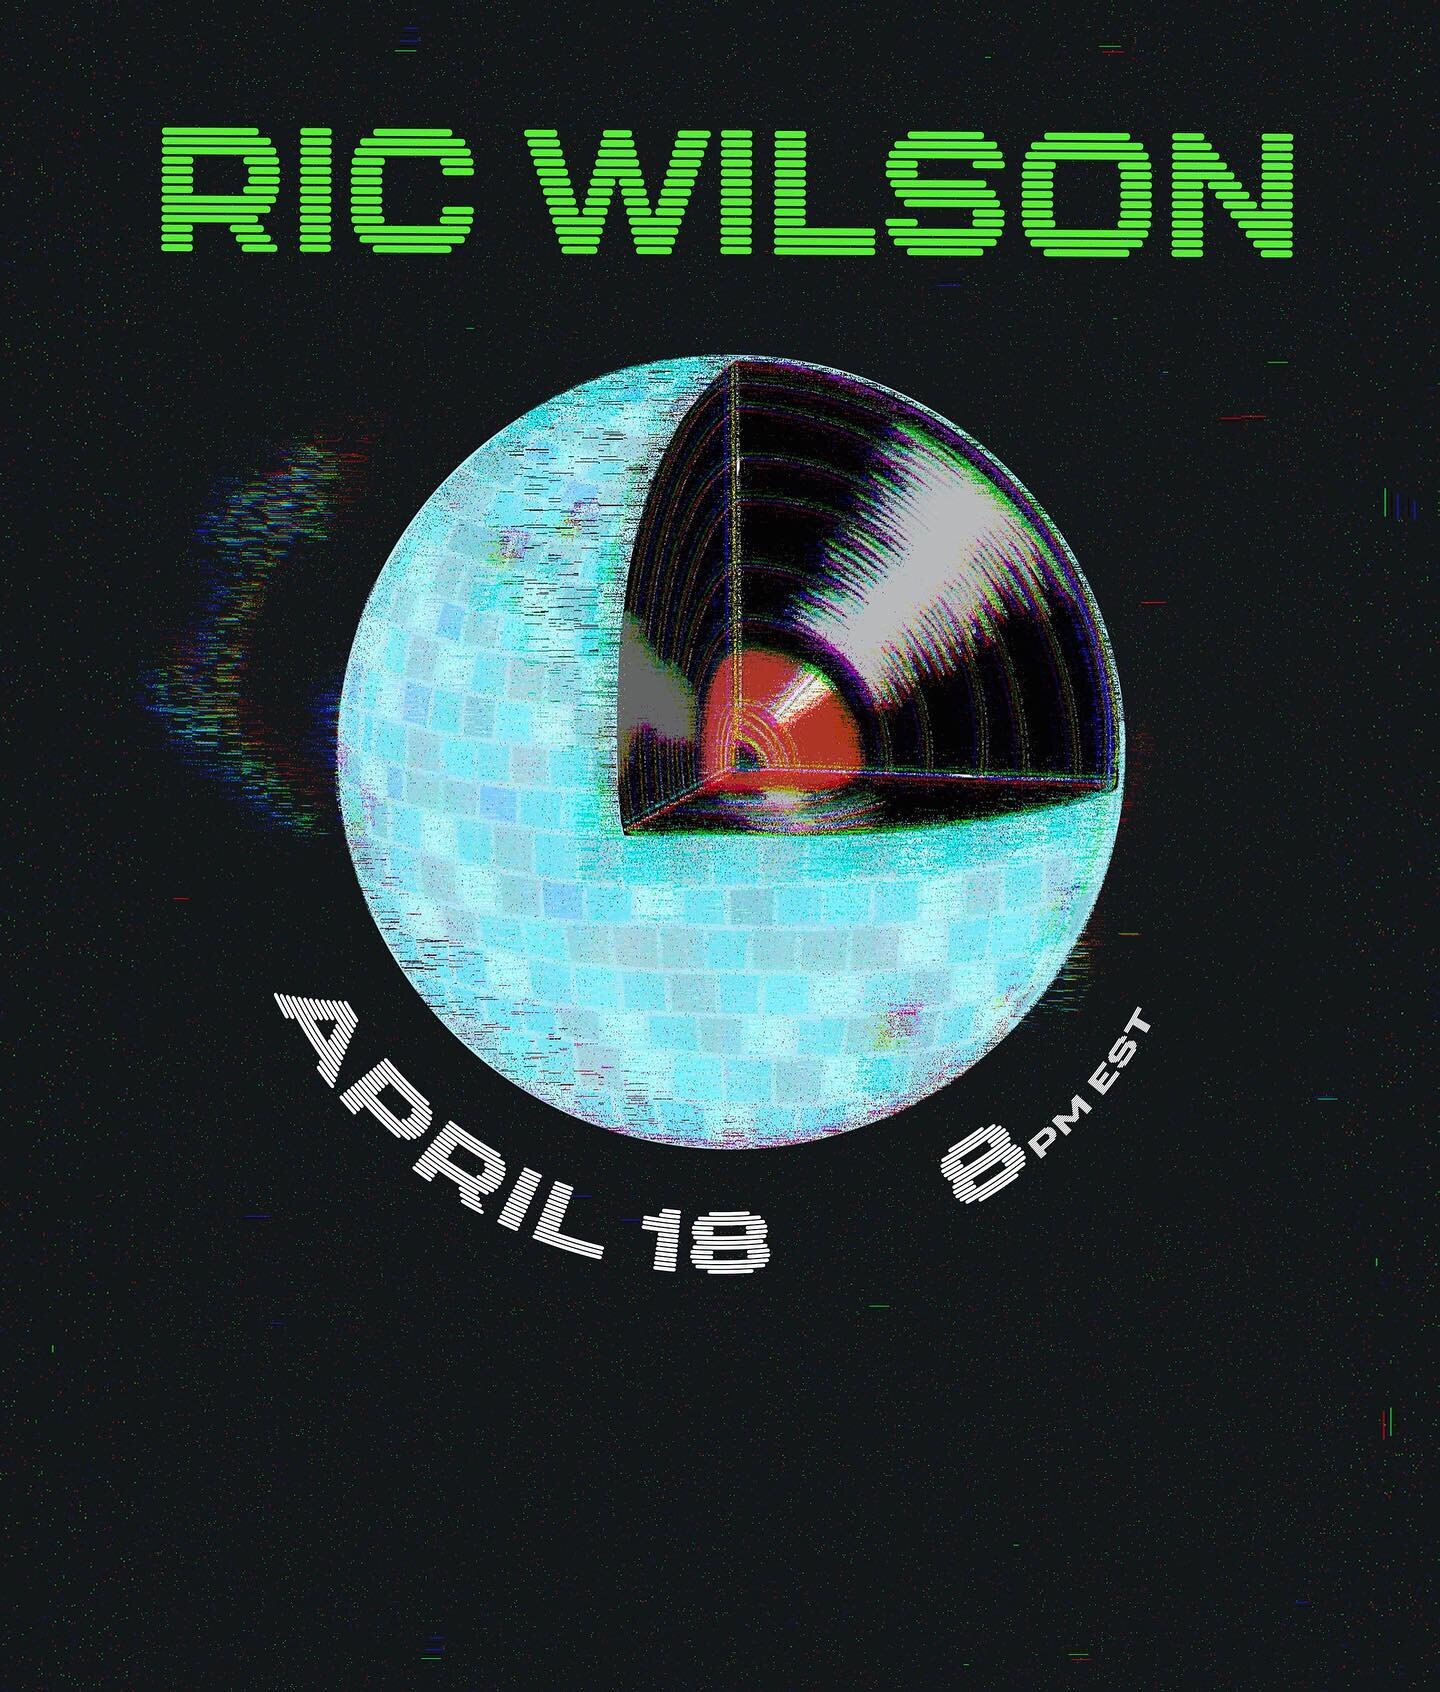 Catch @ricwilsonisme LIVE on WECB&rsquo;s YouTube 4/18 at 8PM EST! 

Graphic by @chloewiliams 

ALT TEXT:

Black TV static background; blue disco ball in the center with a carved out chunk that resembles a vinyl [TEXT READS: RIC WILSON; APRIL 18; 8PM EST]